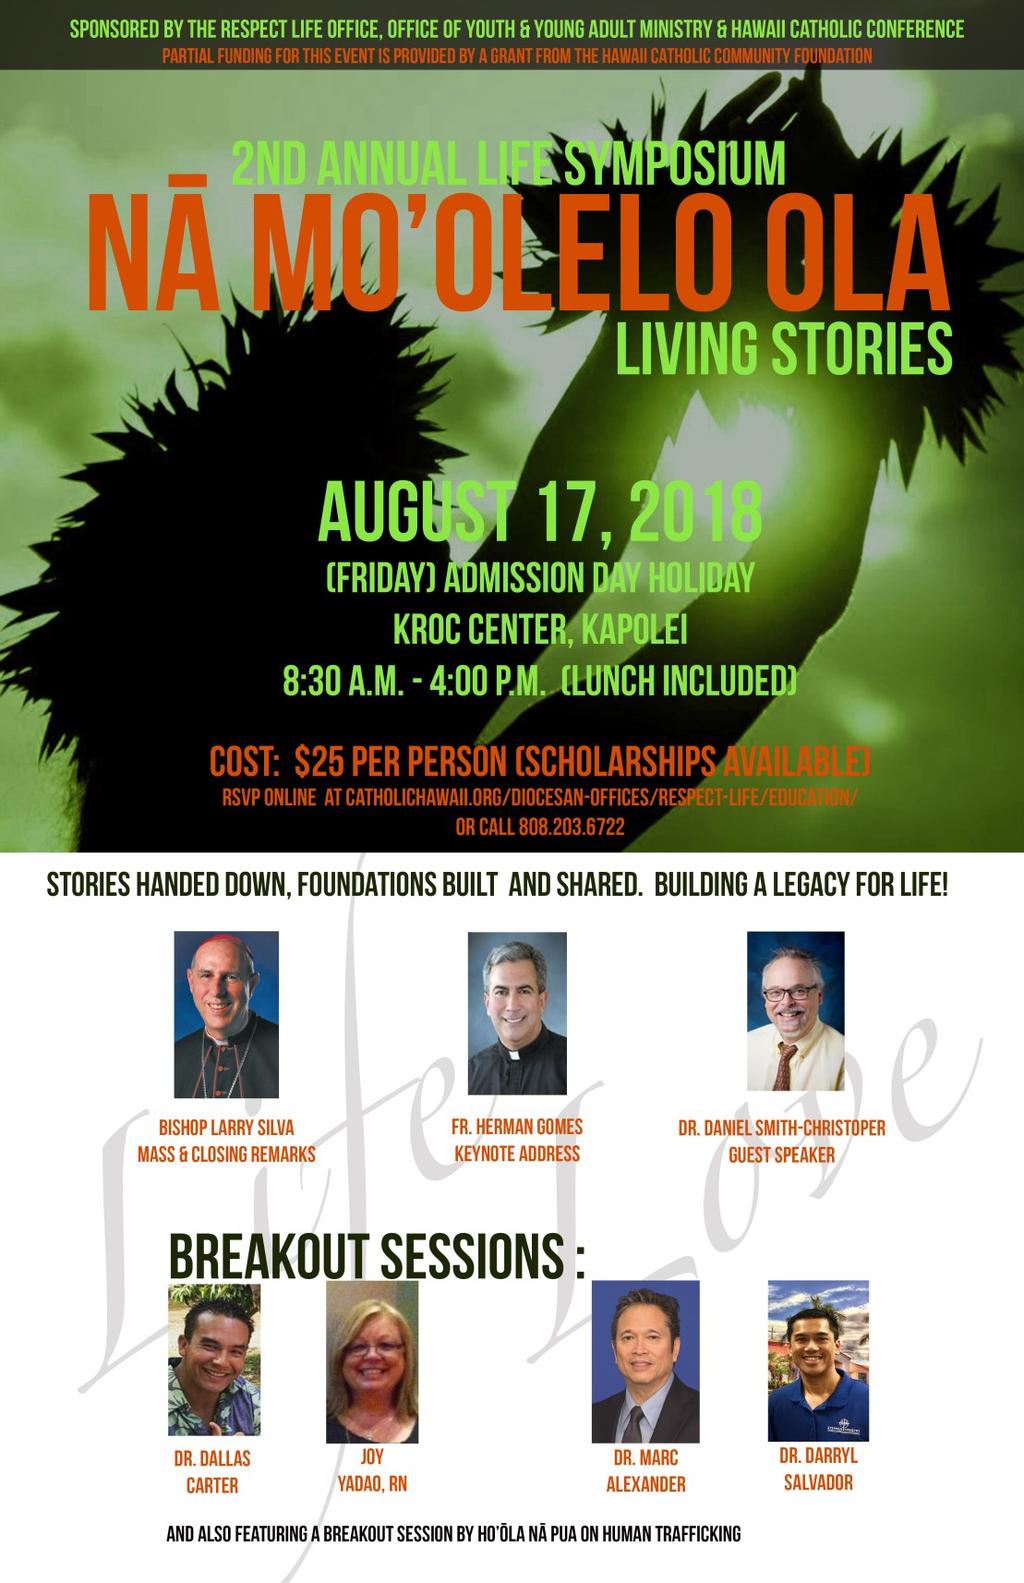 2018 Annual Life Symposium Nā Mo olelo Ola: Living Stories Each person has many unique and personal stories to share.